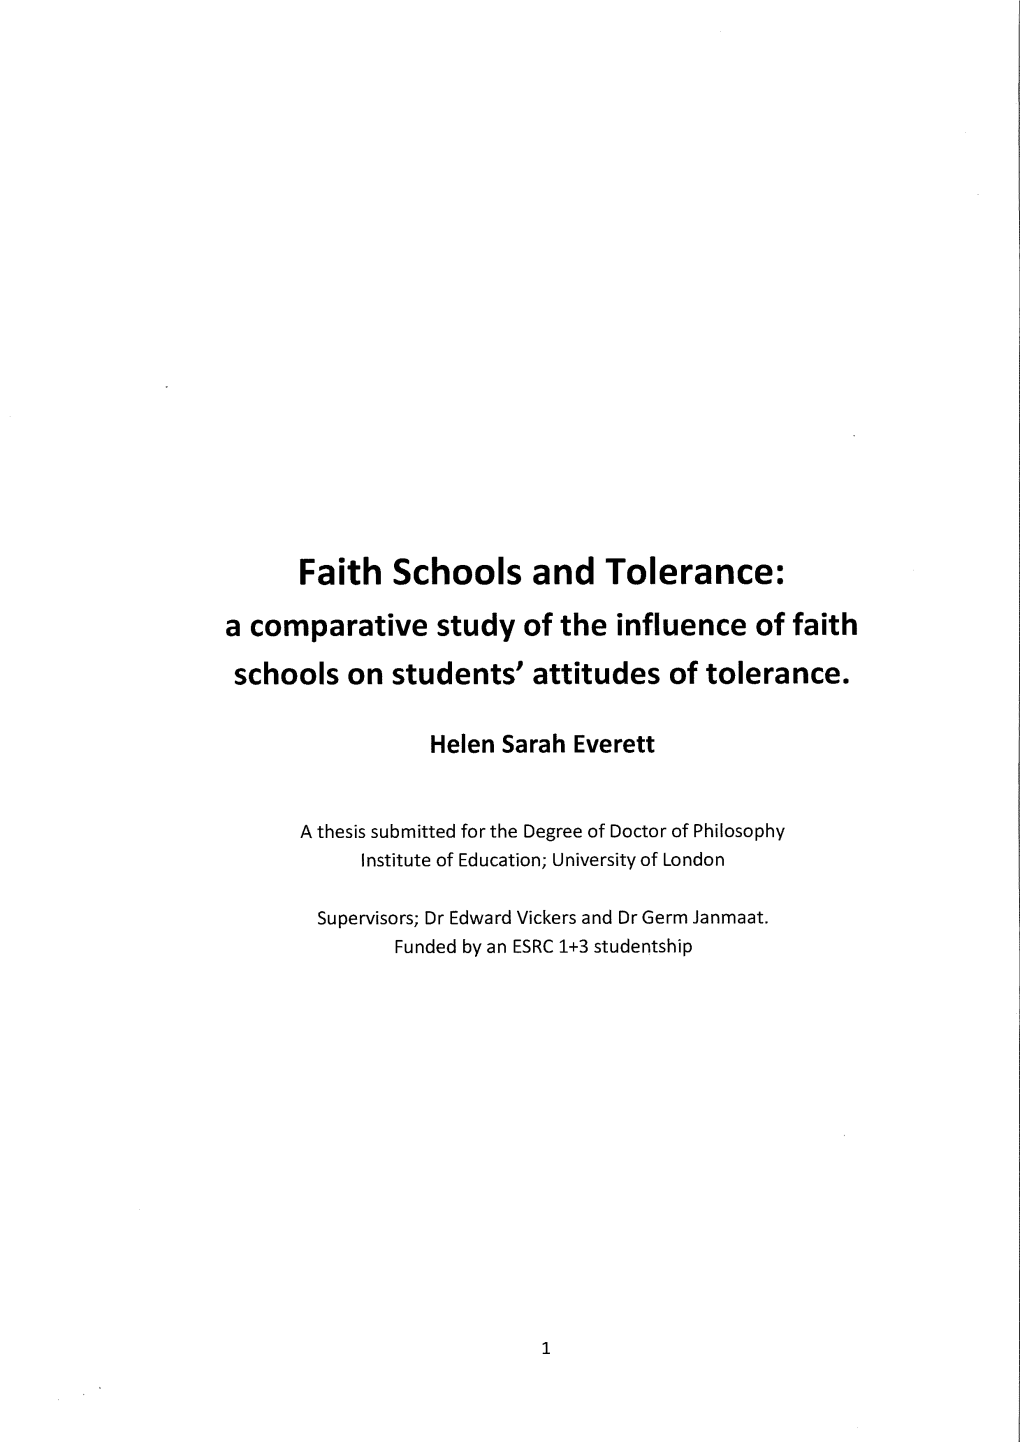 Faith Schools and Tolerance: a Comparative Study of the Influence of Faith Schools on Students' Attitudes of Tolerance